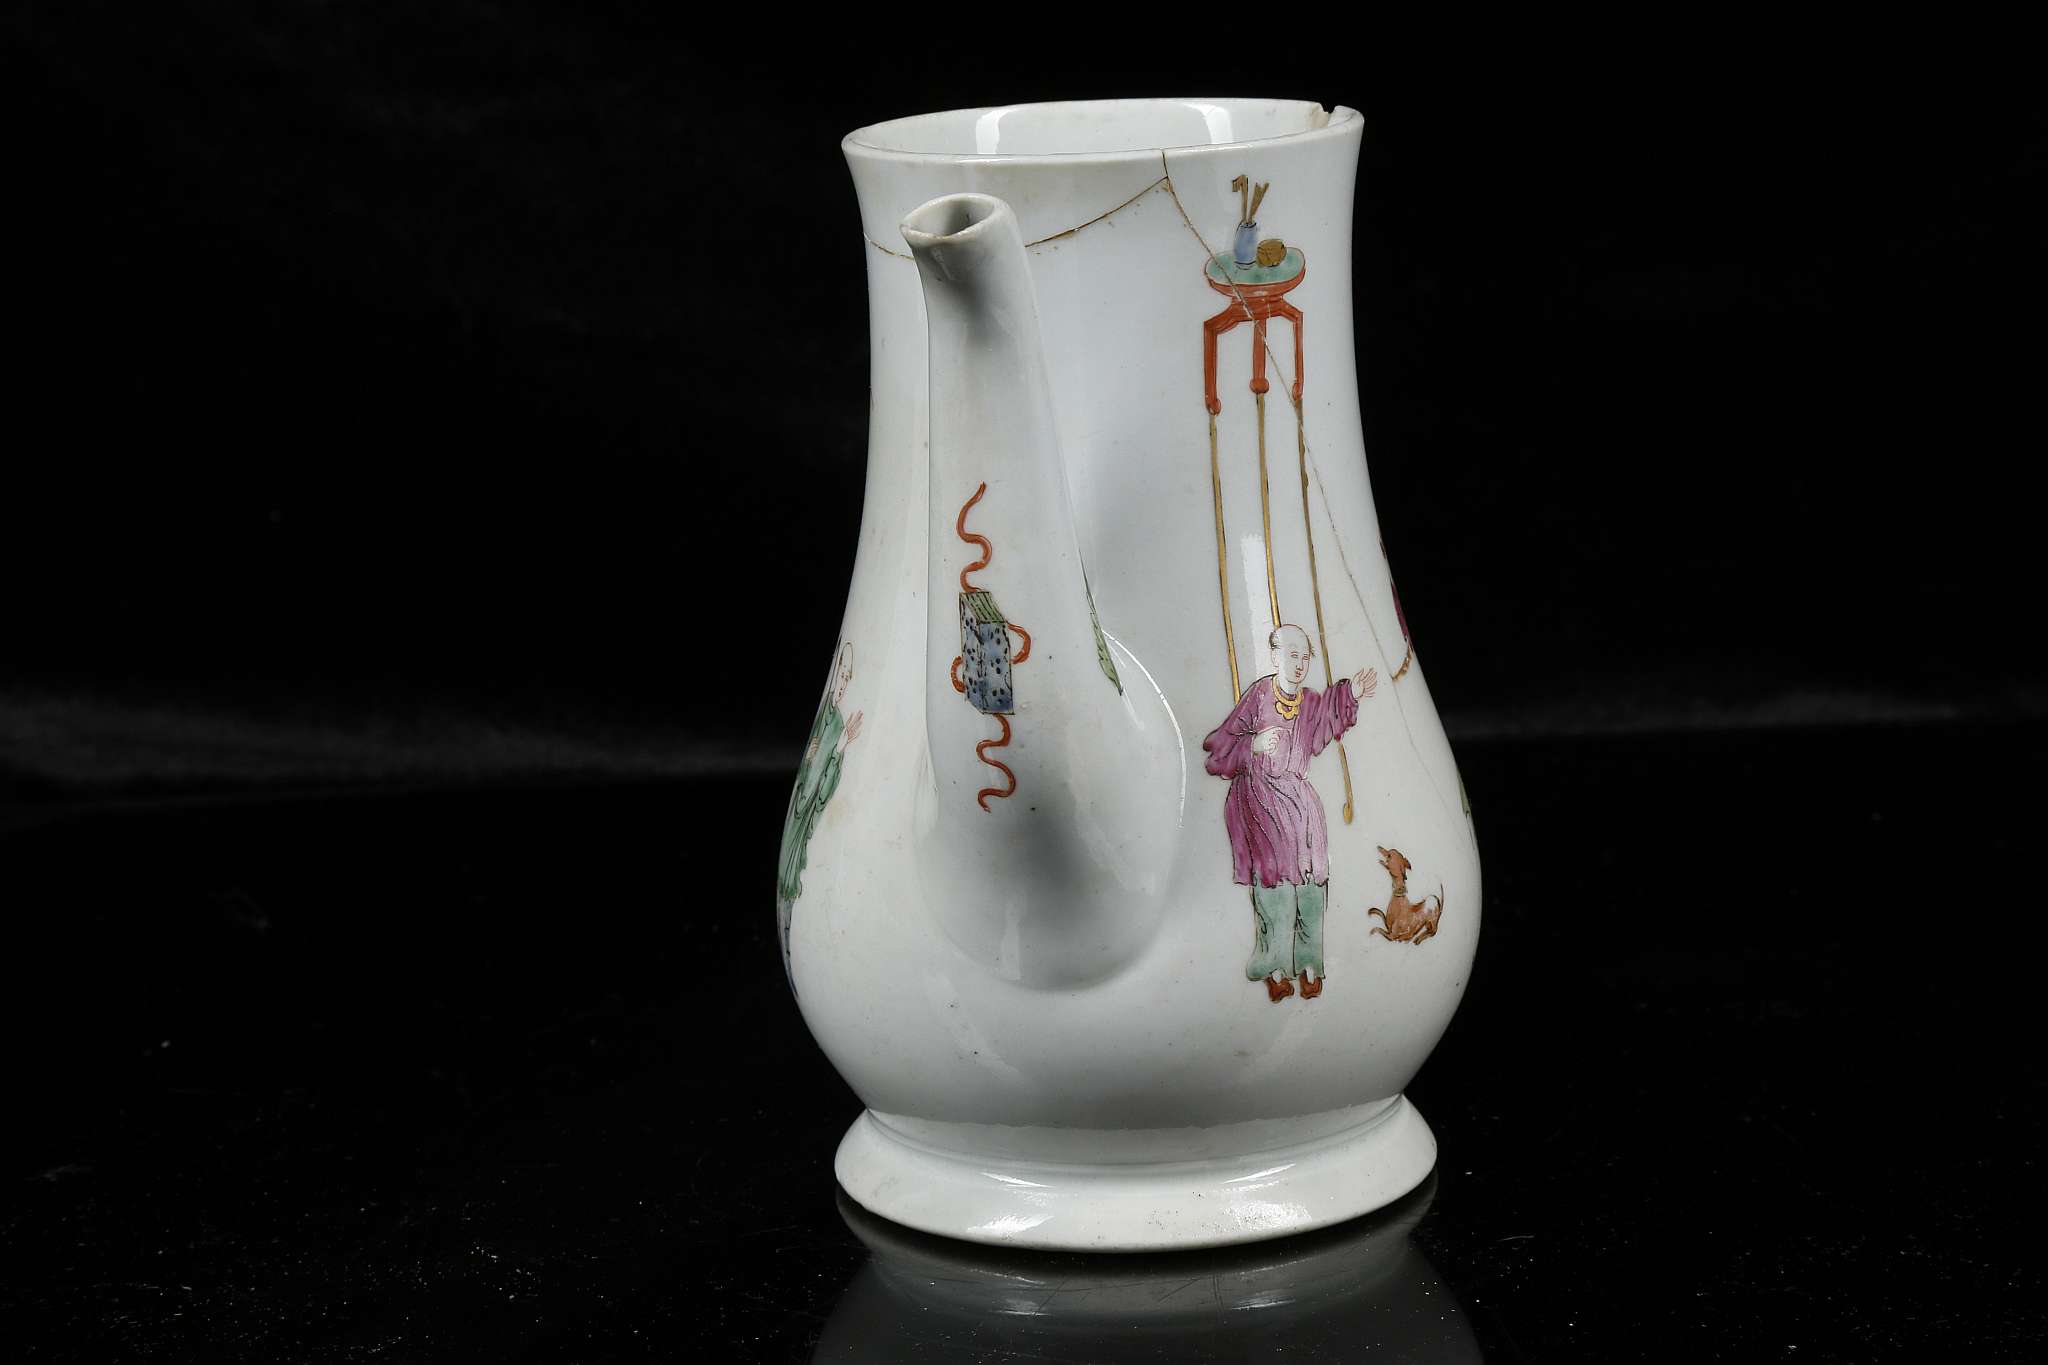 AN EARLY WORCESTER PORCELAIN COFFEE POT, circa 1753, of plain baluster shape on a neatly turned - Image 2 of 5